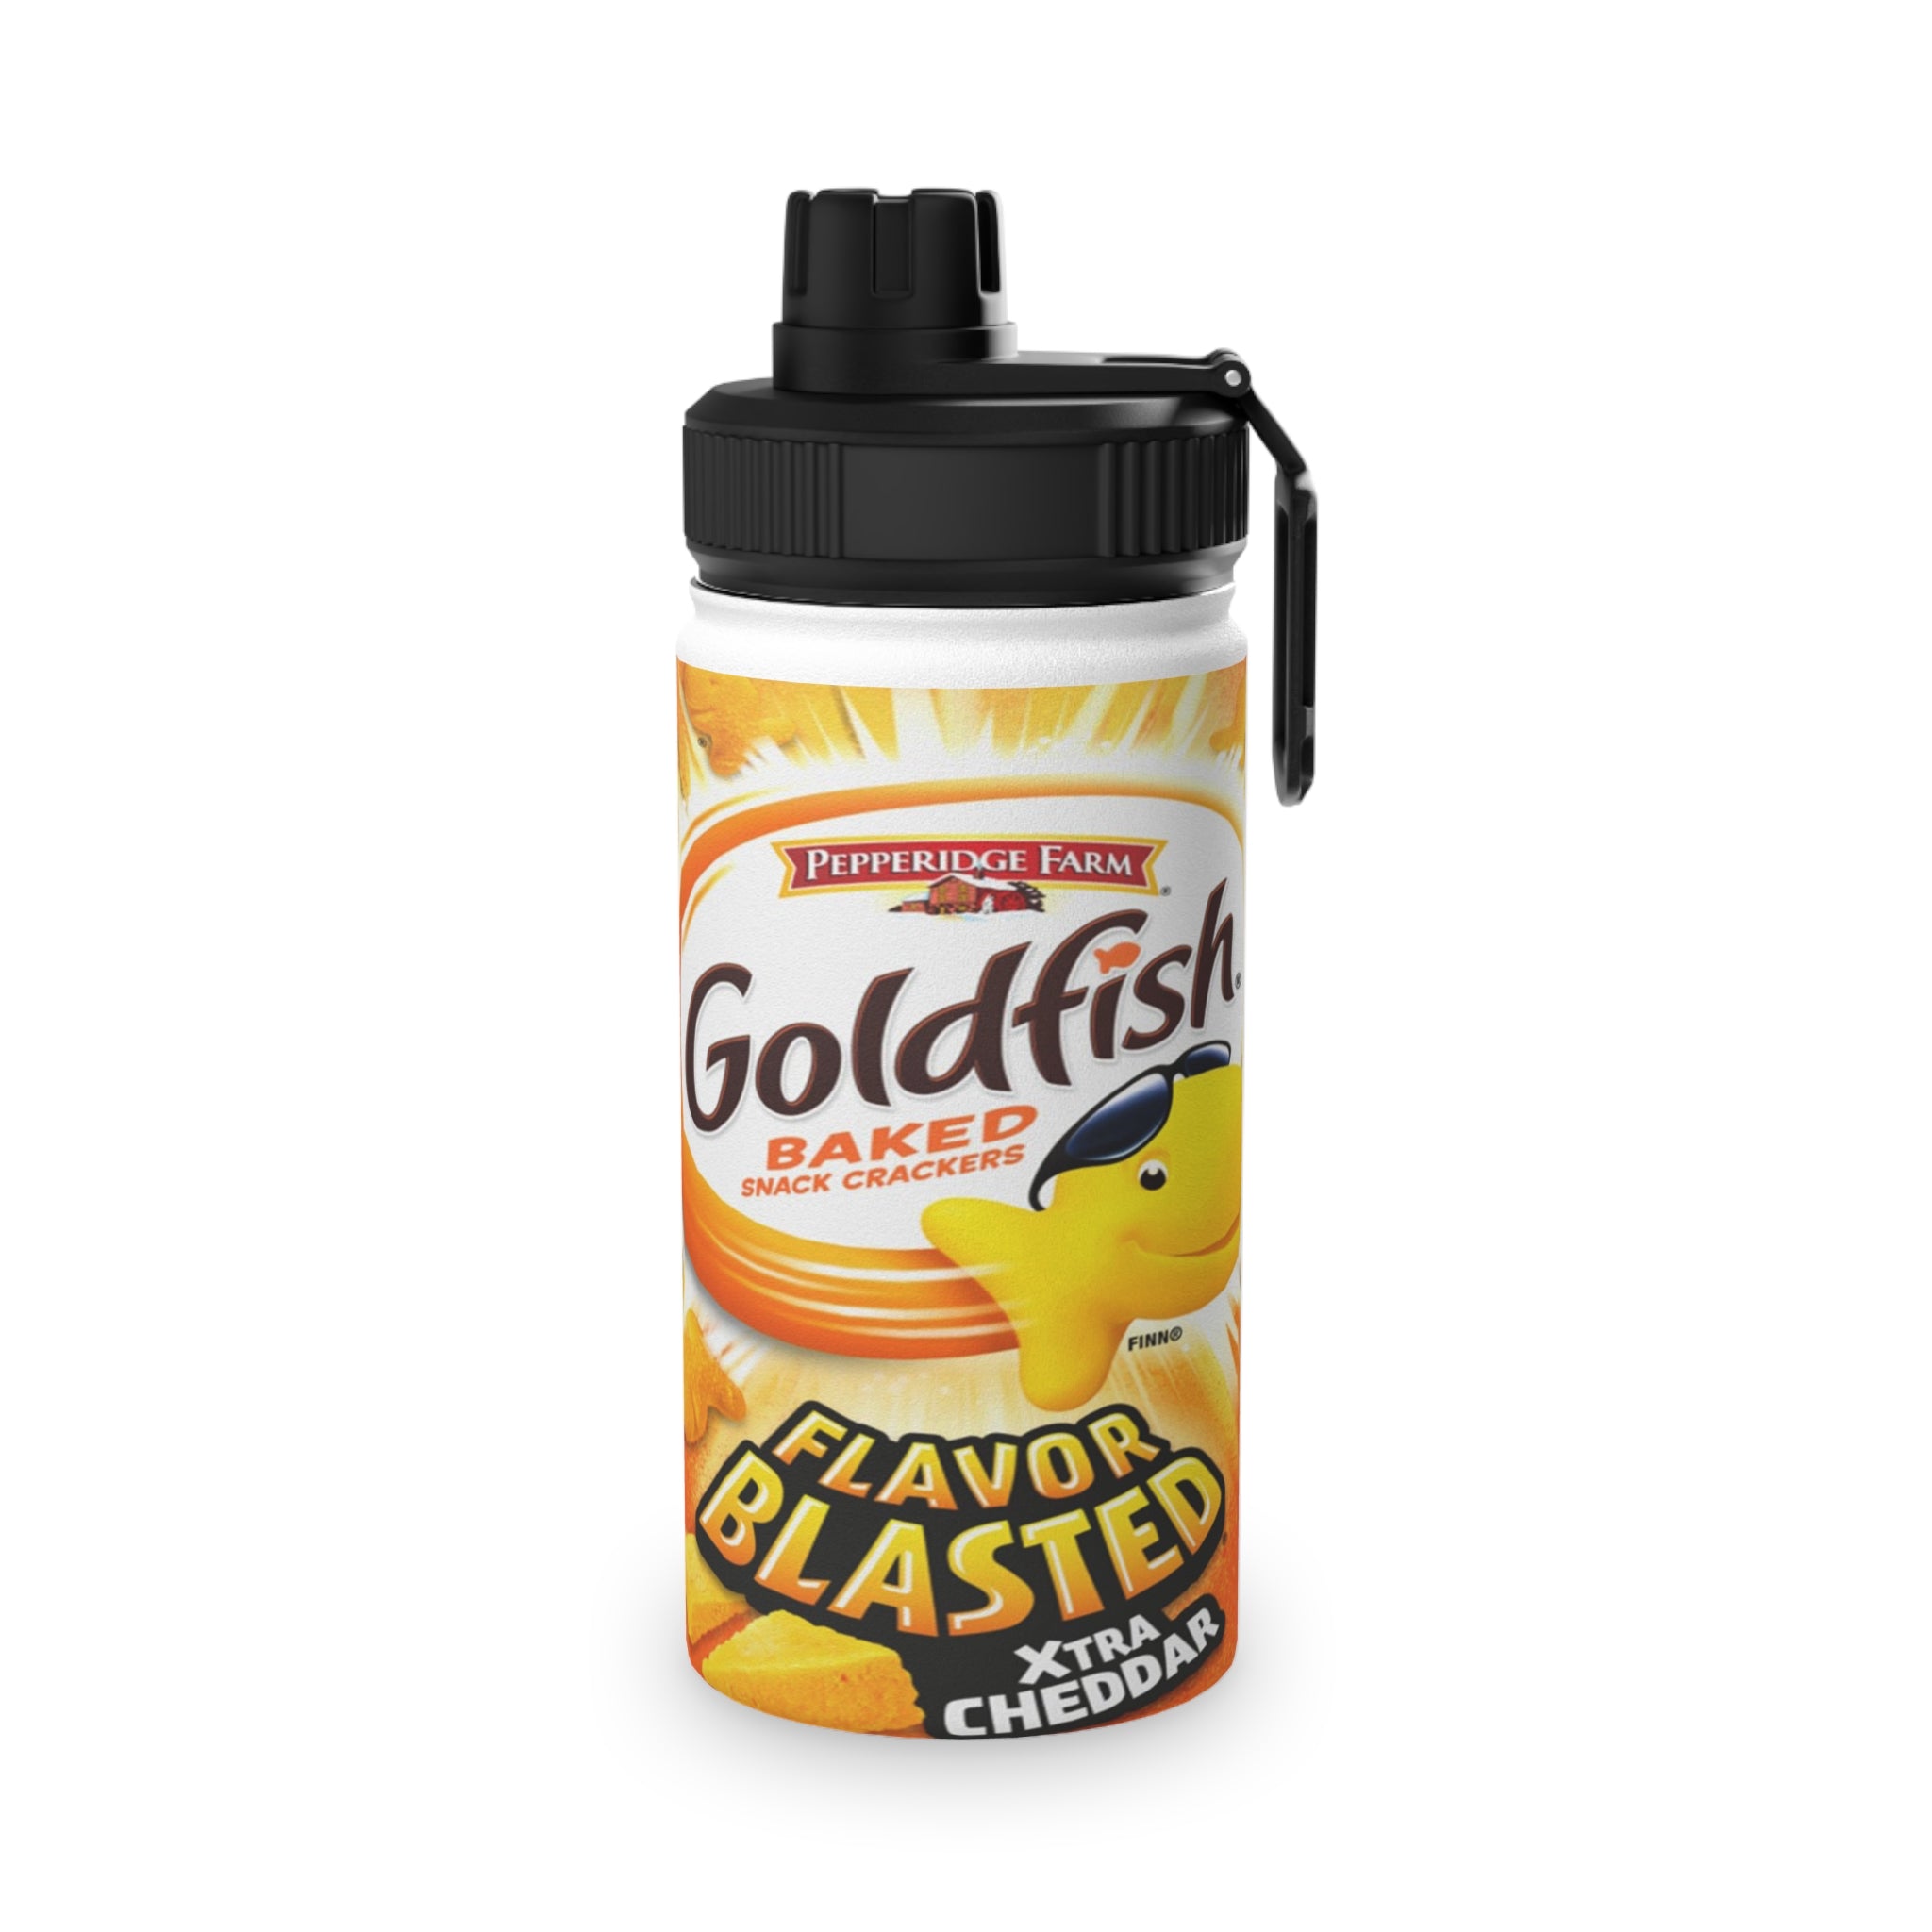 Goldfish Flavor Blasted Xtra Cheddar Baked Snack Crackers Stainless Steel Water Bottle, Sports Lid